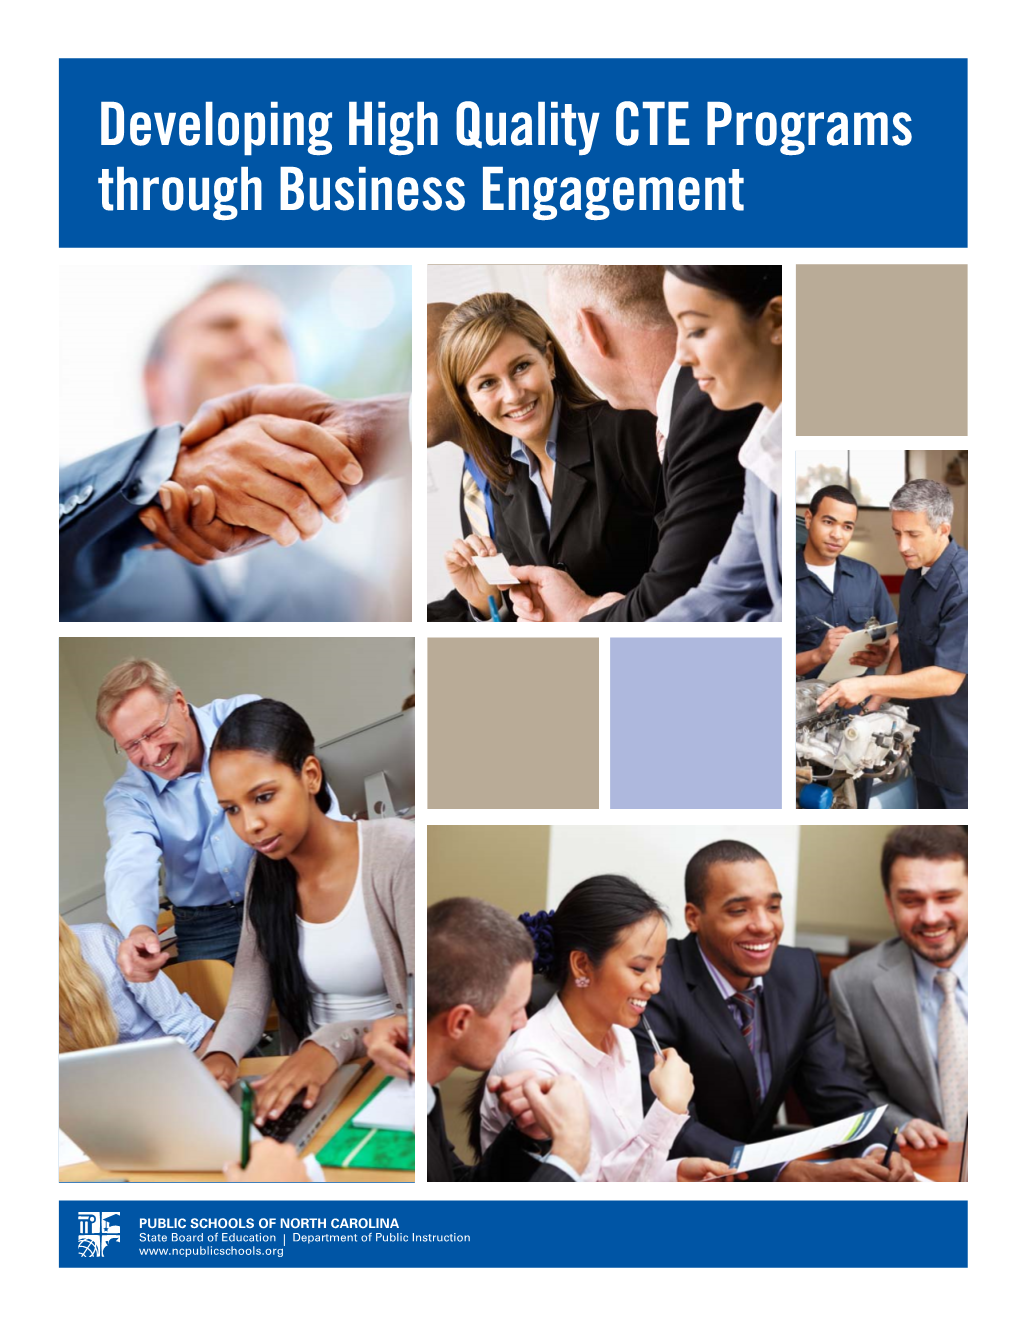 Developing High Quality CTE Programs Through Business Engagement